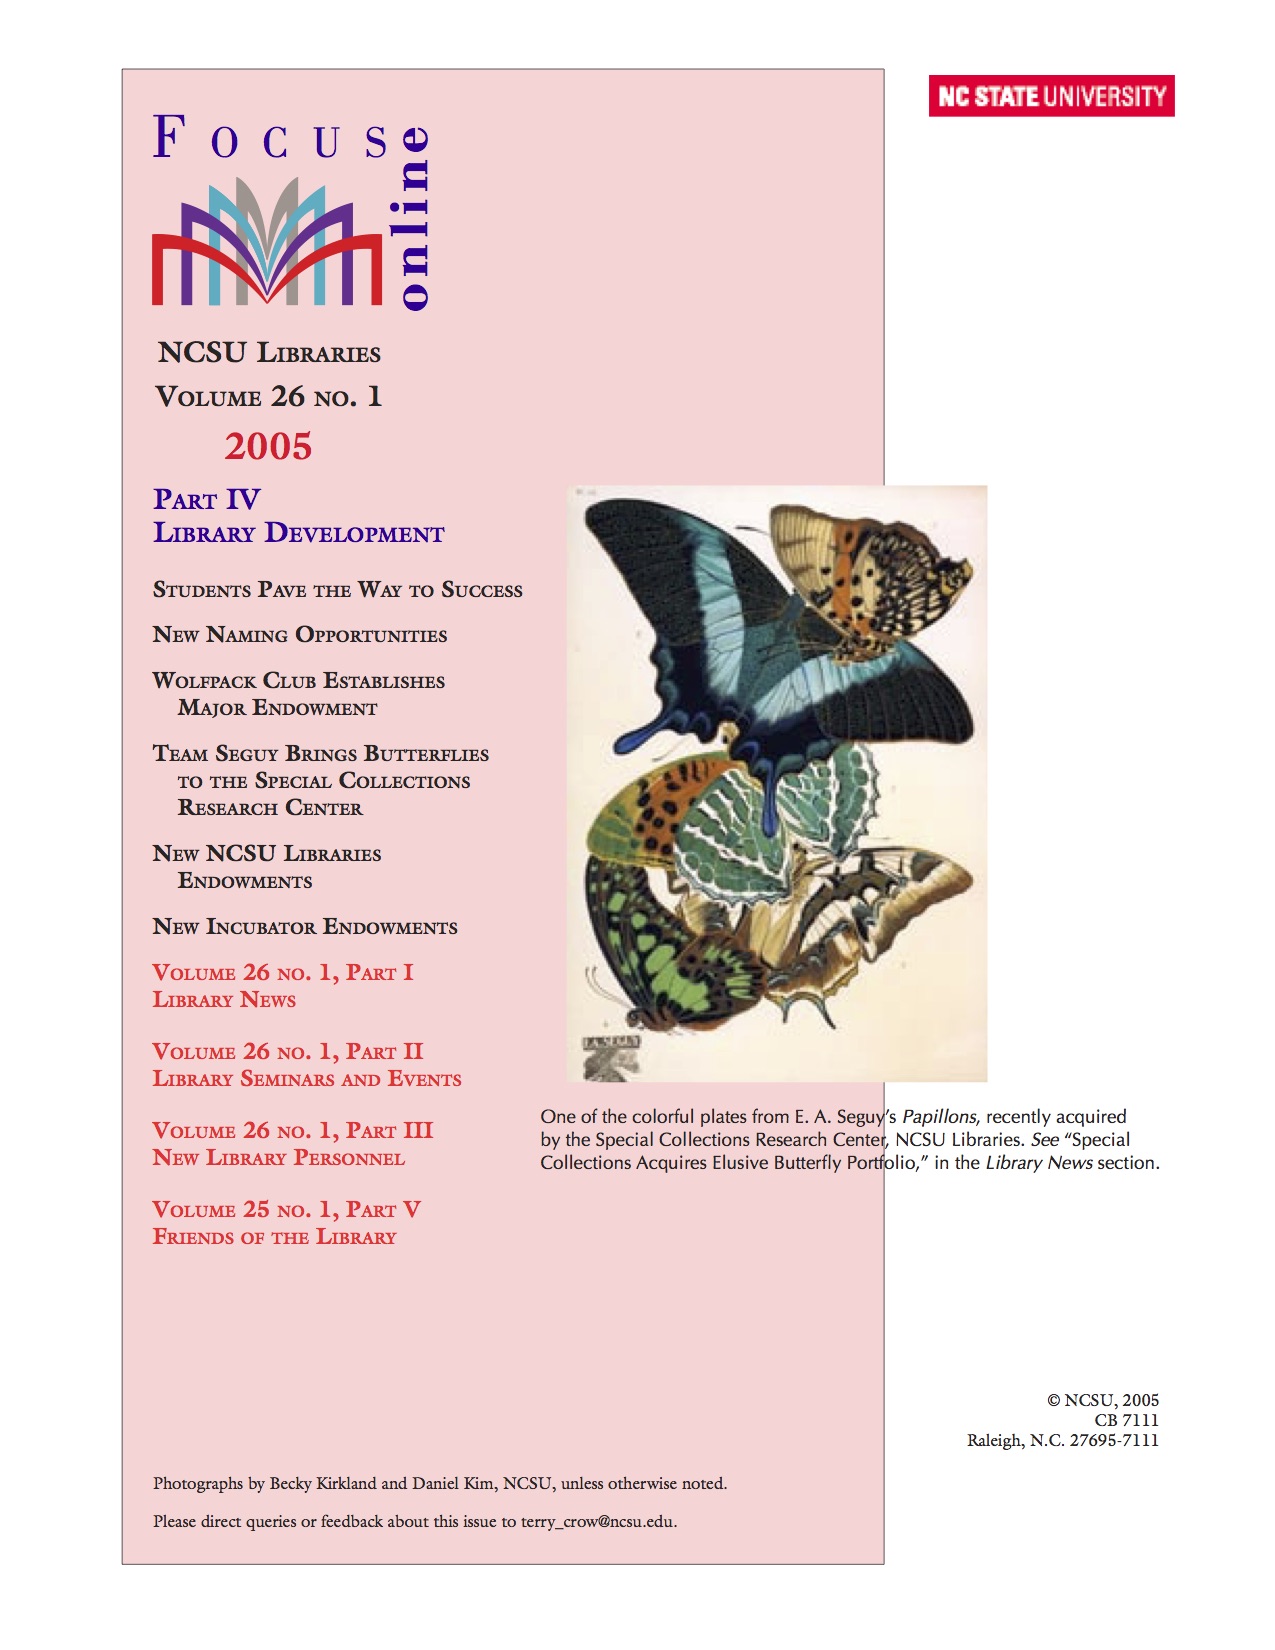 special collections of butterfly portfolio IV